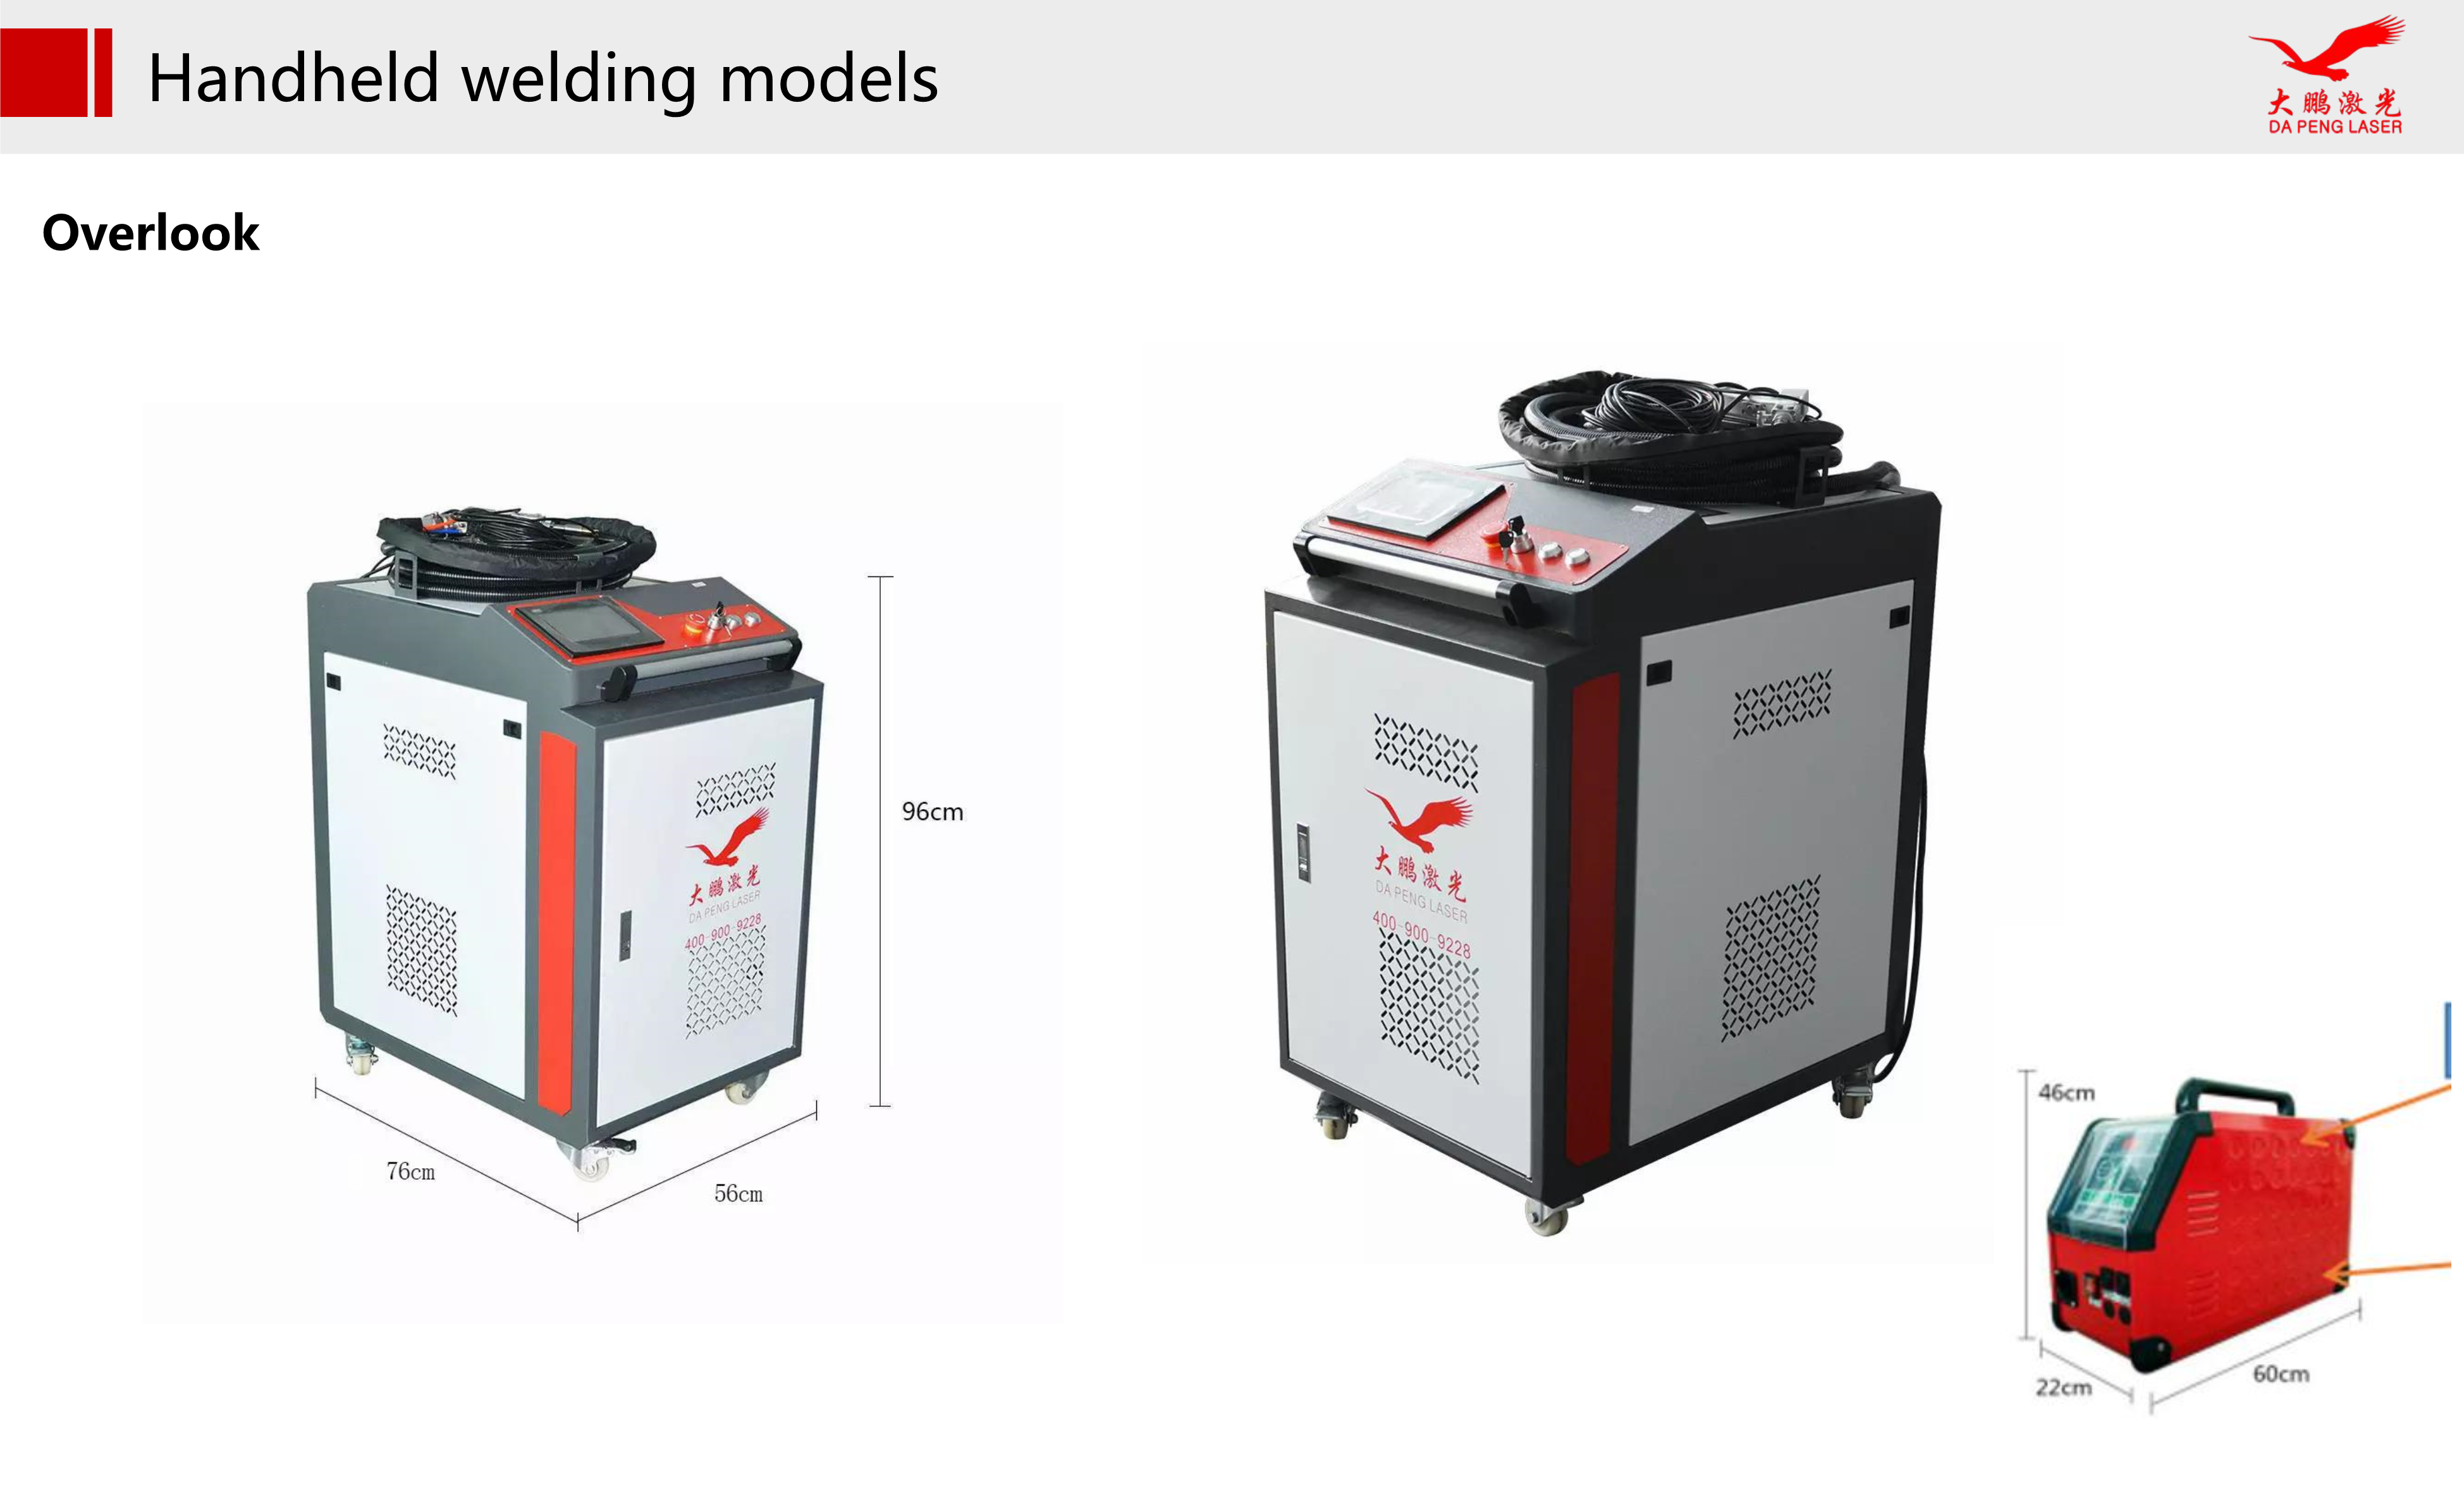 The handheld laser welding machine is easy to use